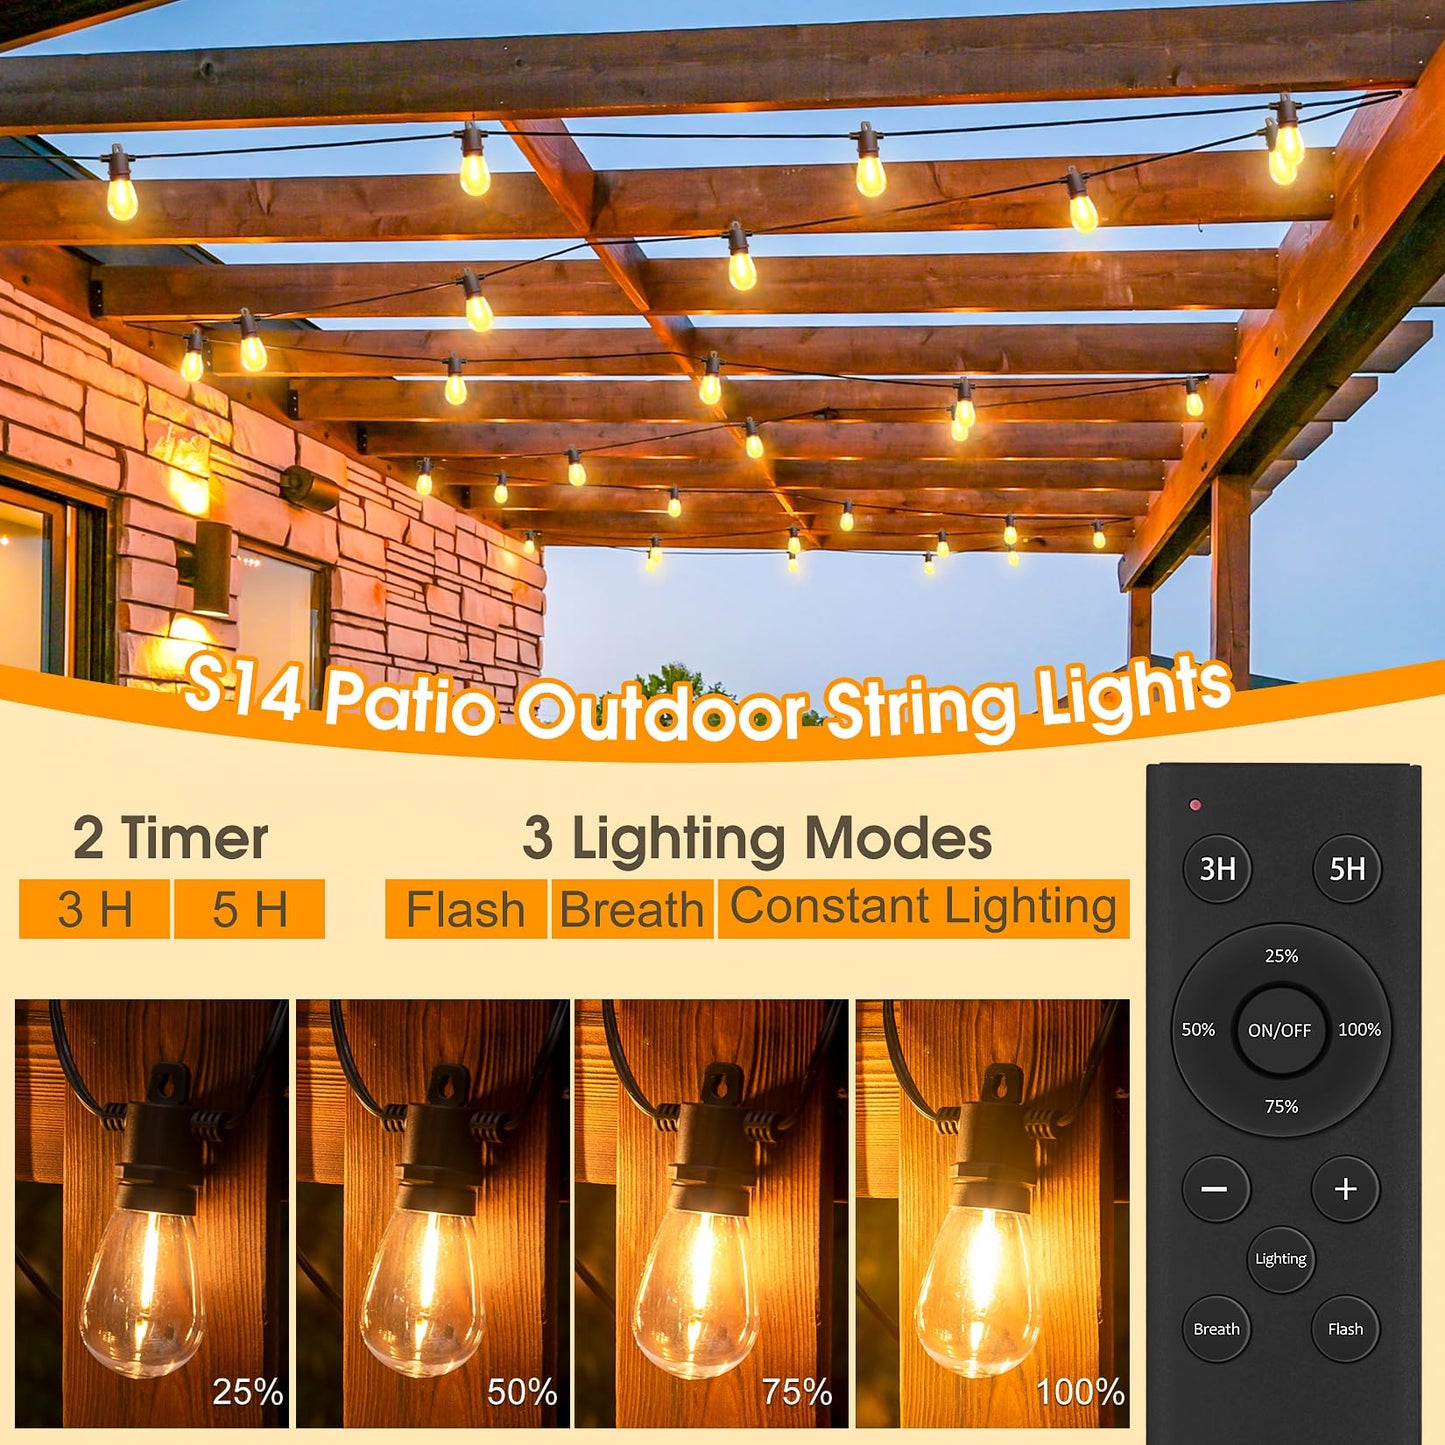 Outdoor String Lights with Remote - Dimmable 100FT IP65 Waterproof Patio Lights with Edison Bulbs Hanging Lights Outside for Backyard Garden Porch Deck Balcony